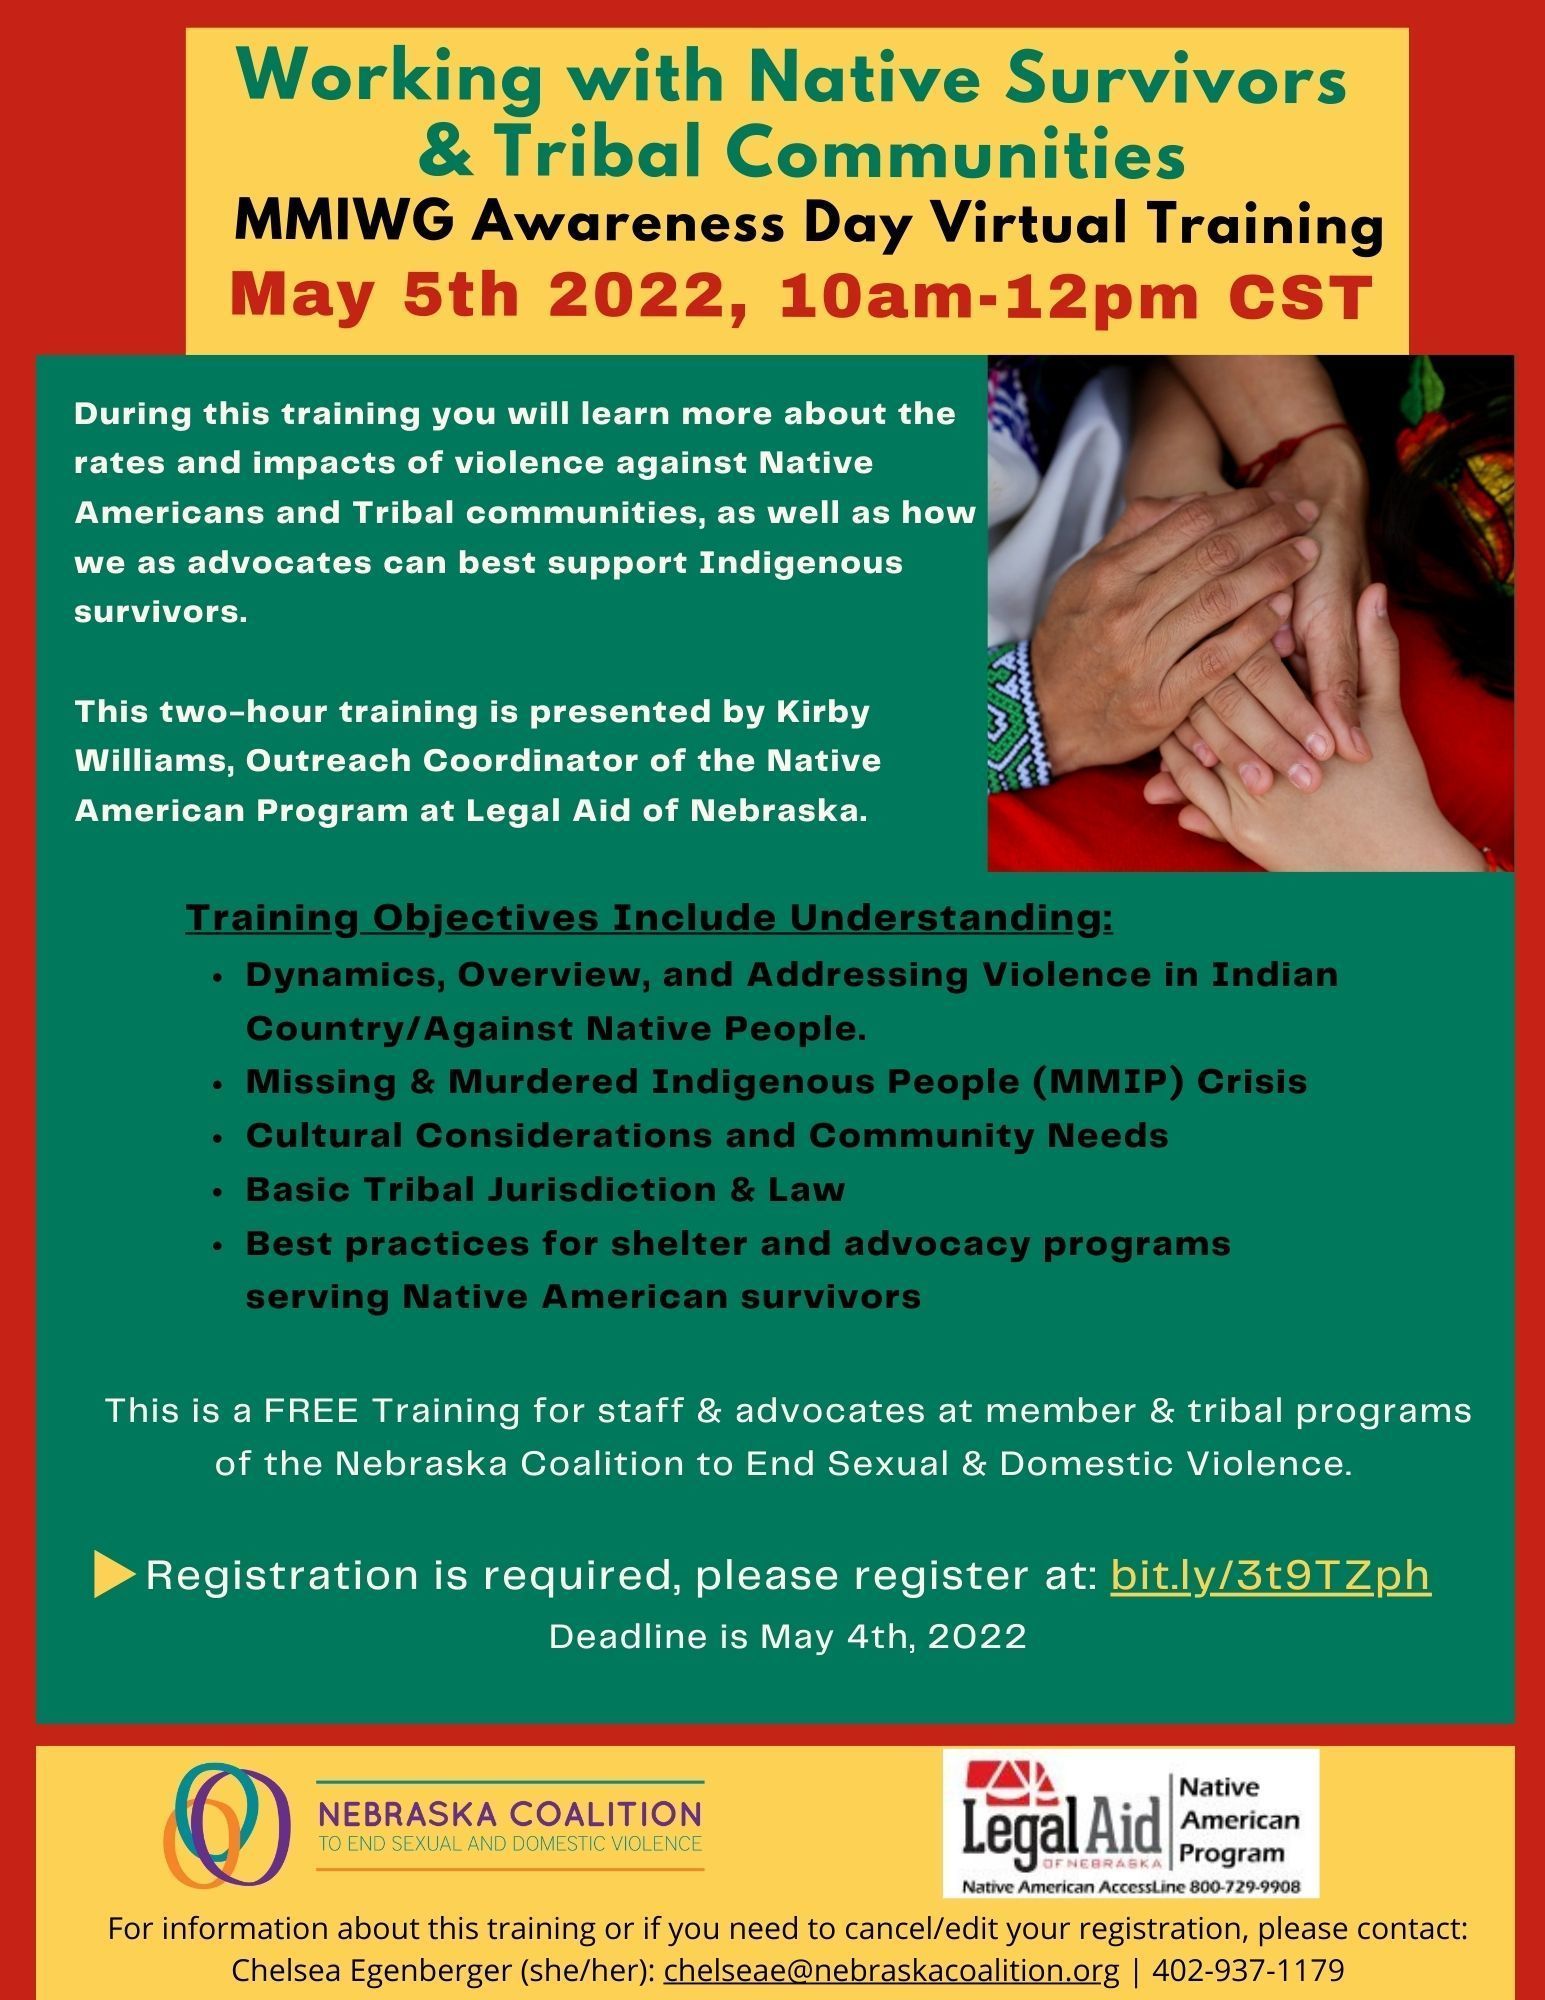 Working with Native Survivors and Tribal Communities Virtual Training May 5th 2022 10am - 12pm CST